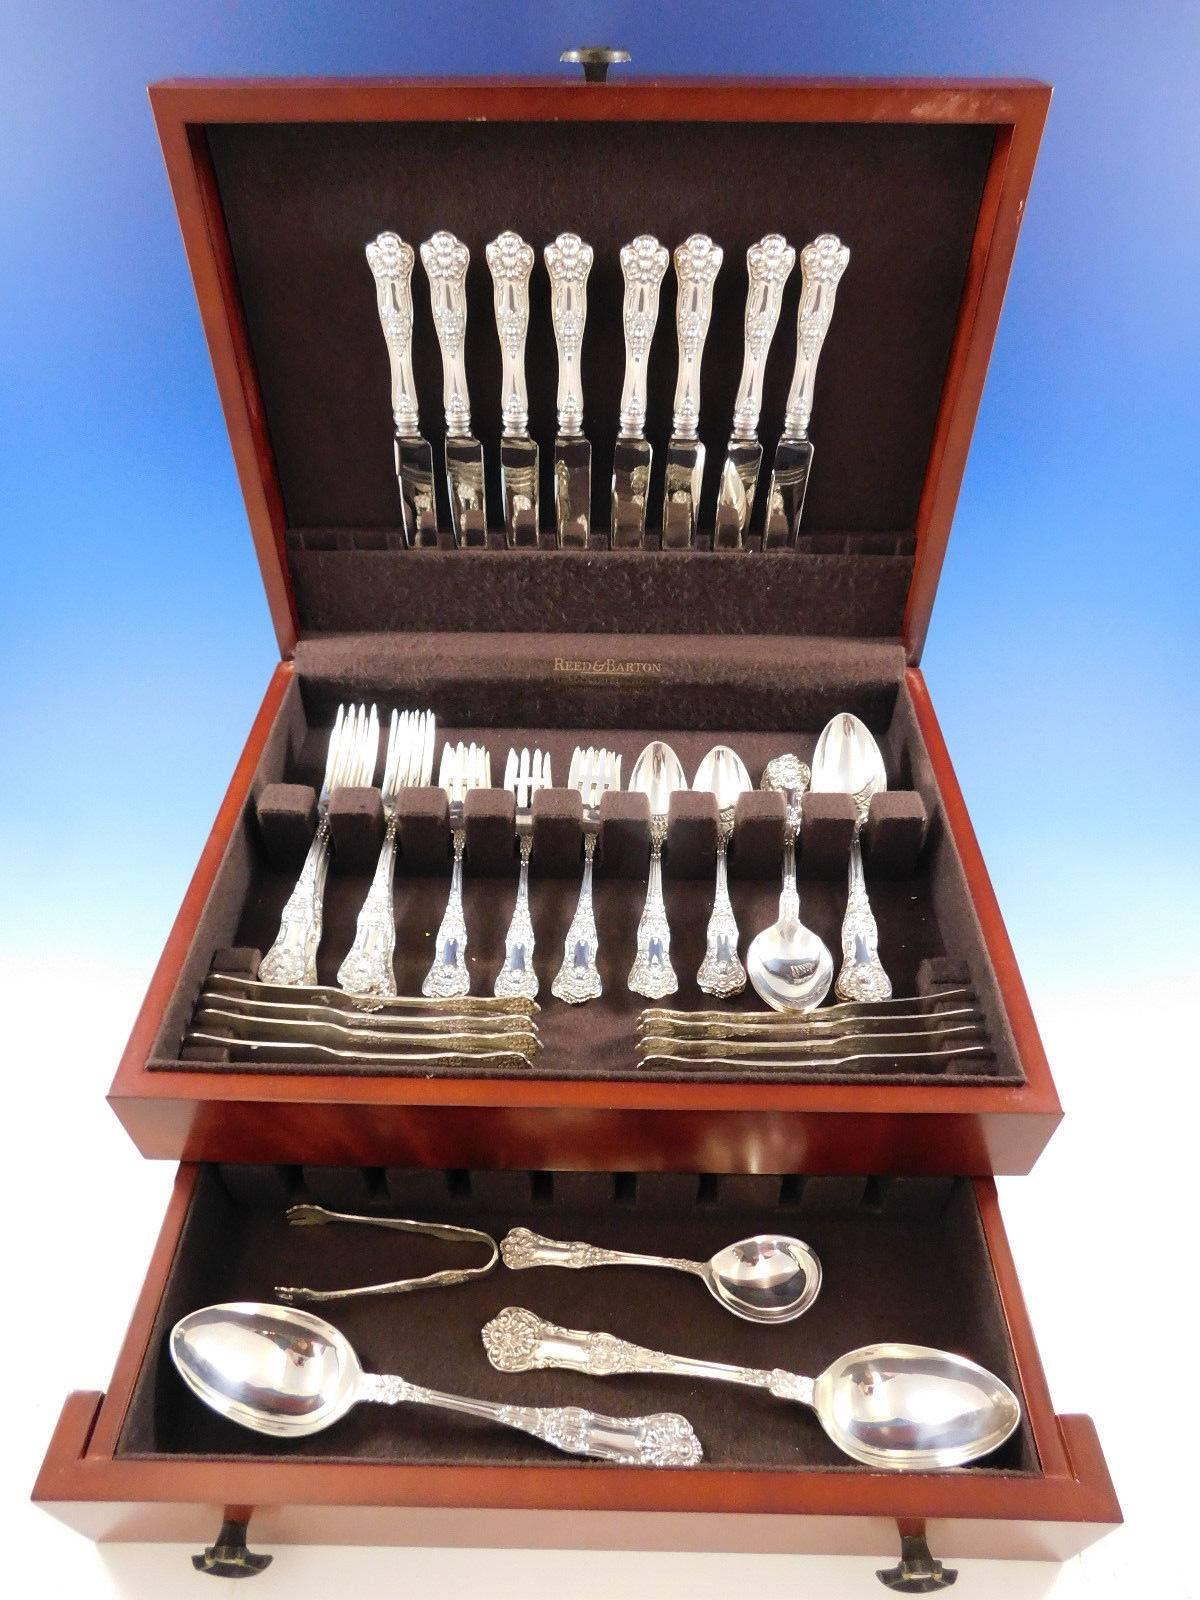 New Kings by Roden Canada shell motif sterling silver flatware set, 52 pieces. This set includes: \

eight knives, 8 5/8